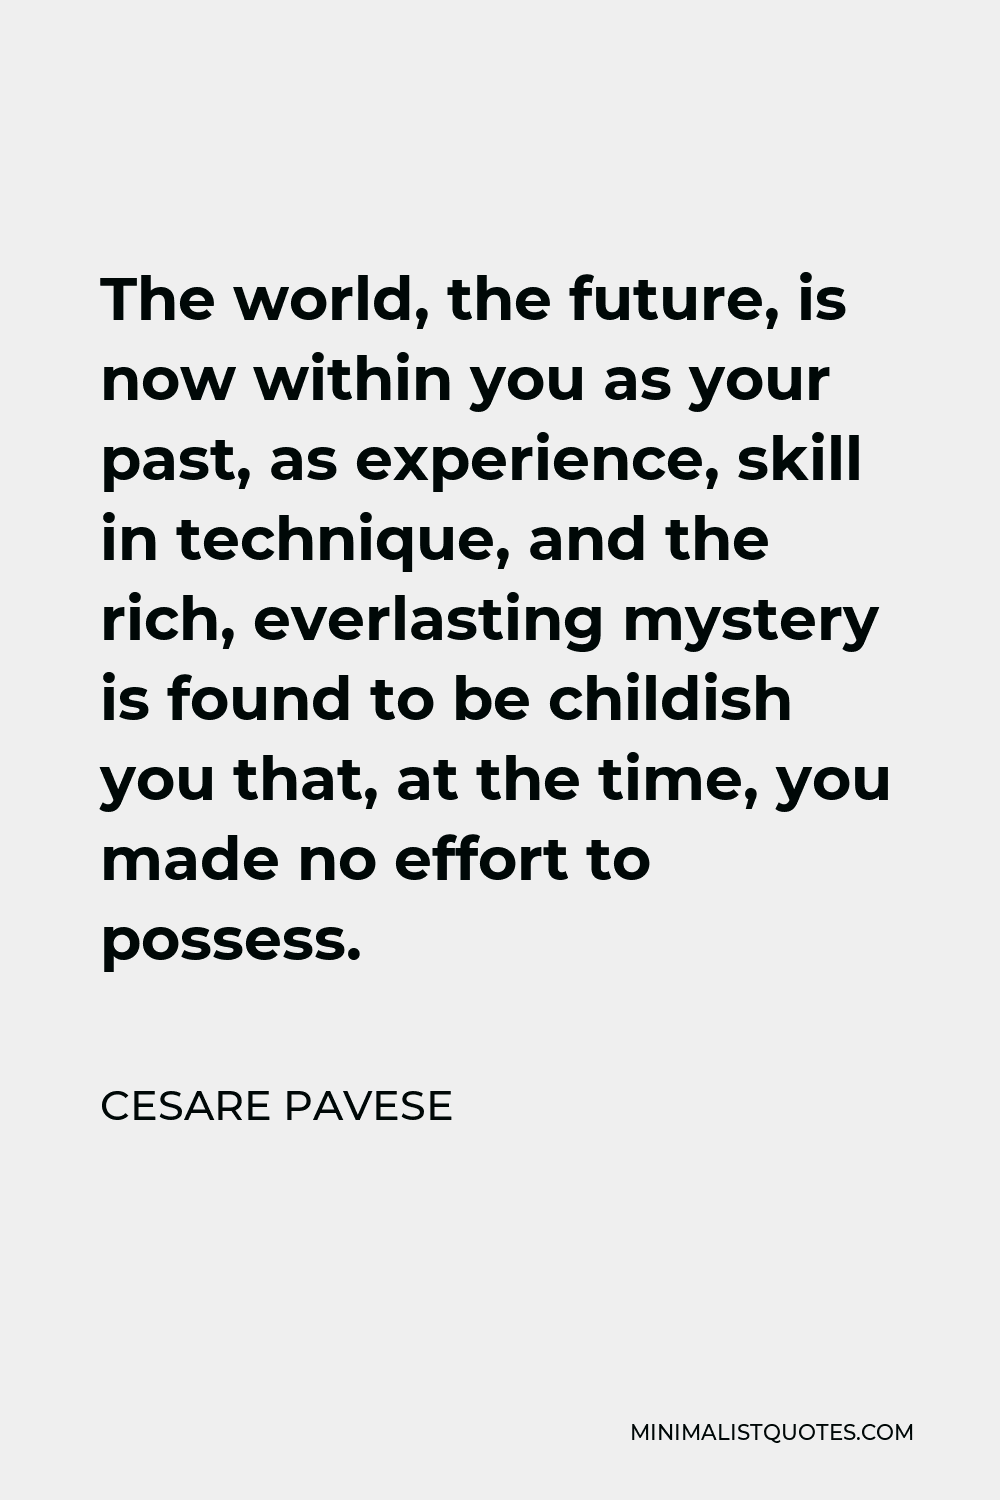 Cesare Pavese Quote - The world, the future, is now within you as your past, as experience, skill in technique, and the rich, everlasting mystery is found to be childish you that, at the time, you made no effort to possess.